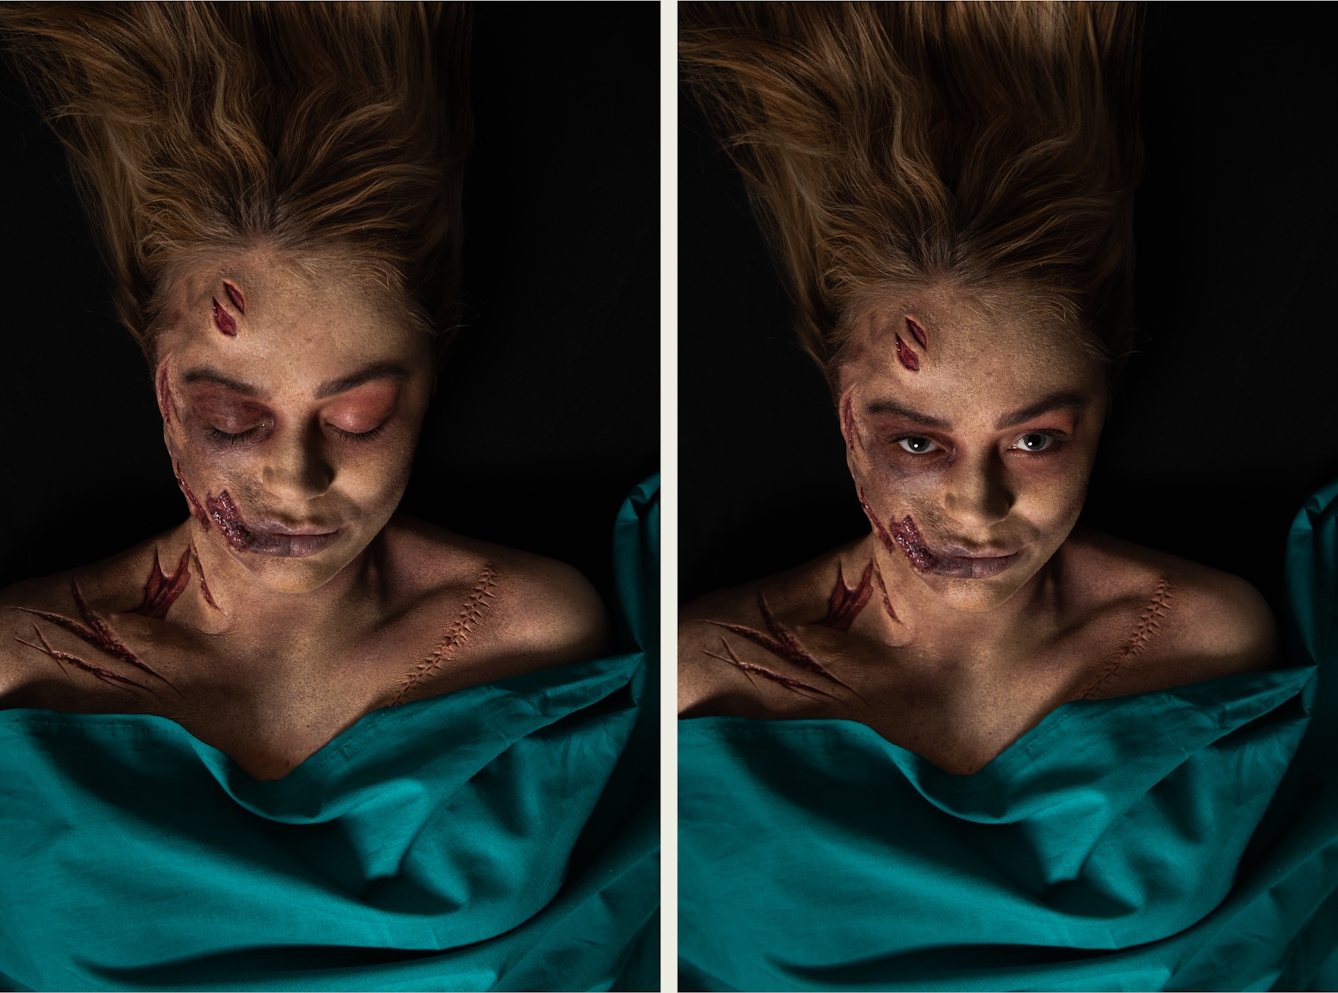 Photographic diptych. The image on the left shows the head and shoulders of a woman lying on her back on a black background. Her chest is covered with a green surgical sheet. She has her eyes closed and her blond hair falls back onto the tabletop. She has prosthetic makeup applied which creates the realistic effect of the left side of her face, neck and shoulders having been slashed with a knife. The makeup reveals the layers below the skin. On the right side by her shoulder there is makeup which creates the impression of a long surgical cut which has been stitched up. The image on the right is exactly the same only the woman's eyes are open and looking straight into the camera. 